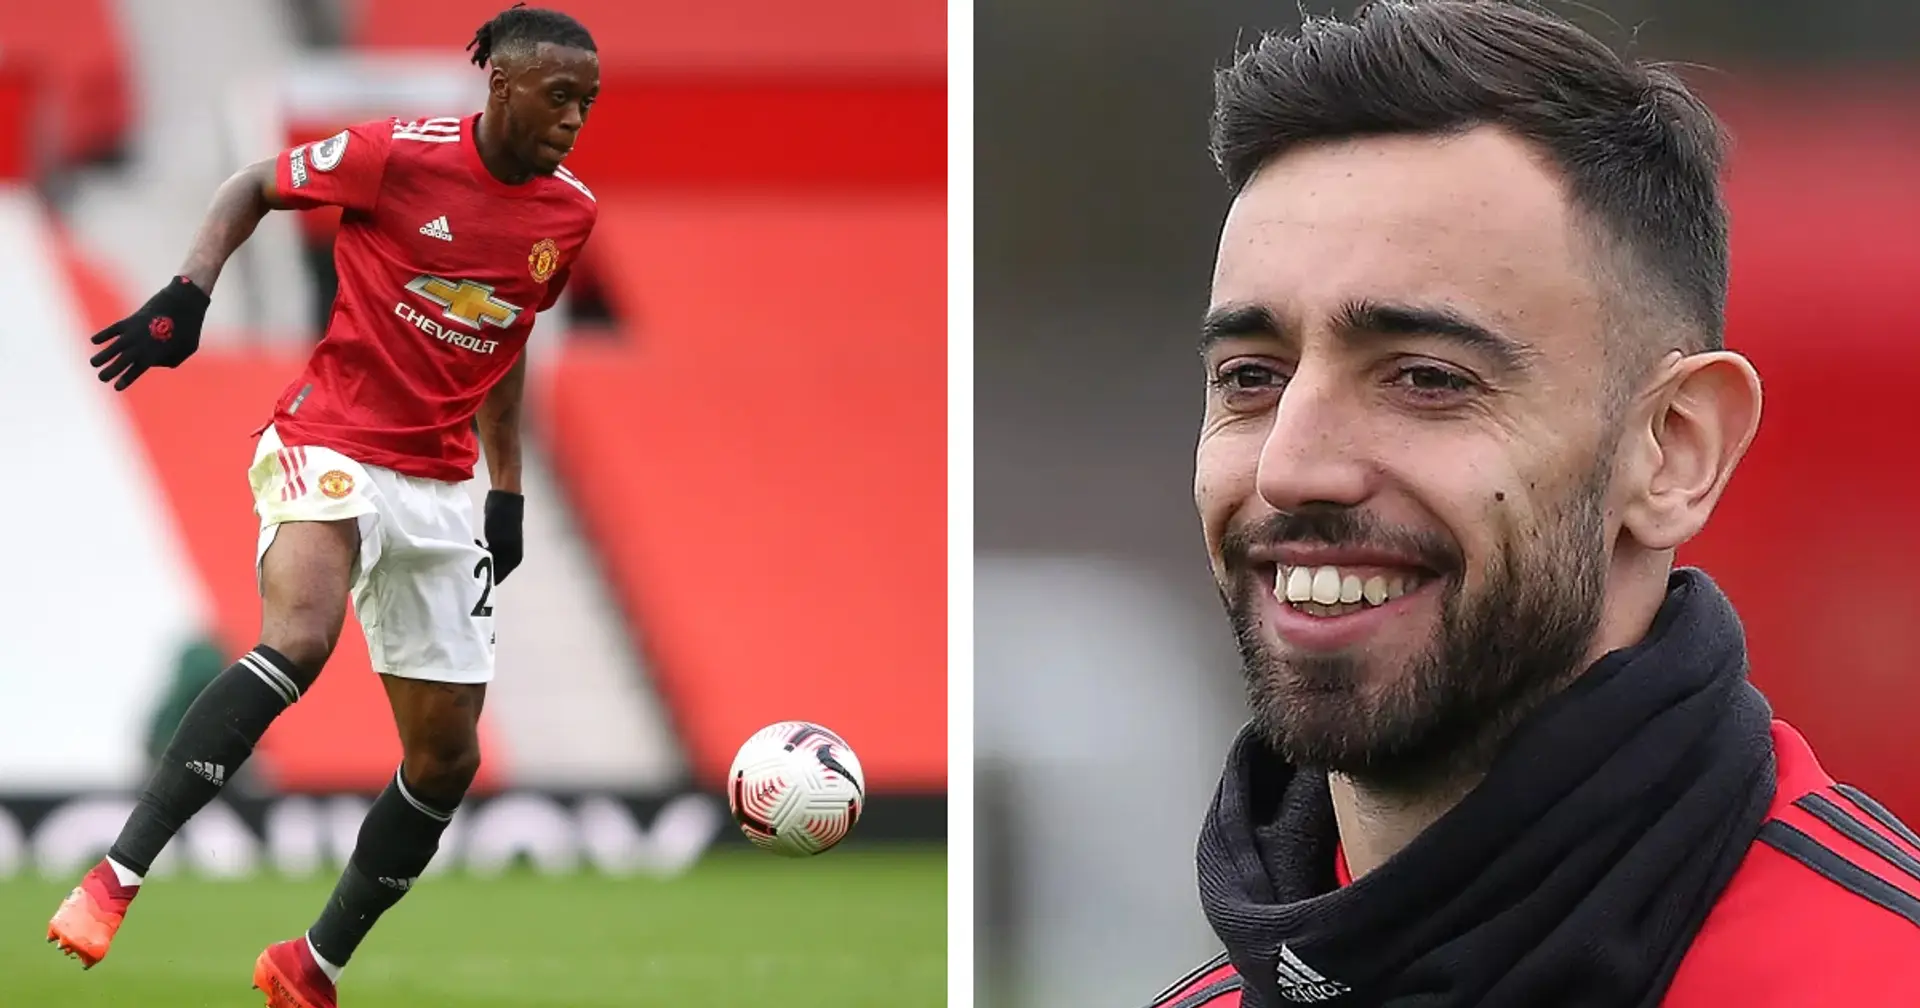 'We didn't know he can shoot!': Bruno Fernandes reacts hilariously to Aaron Wan-Bissaka's goal